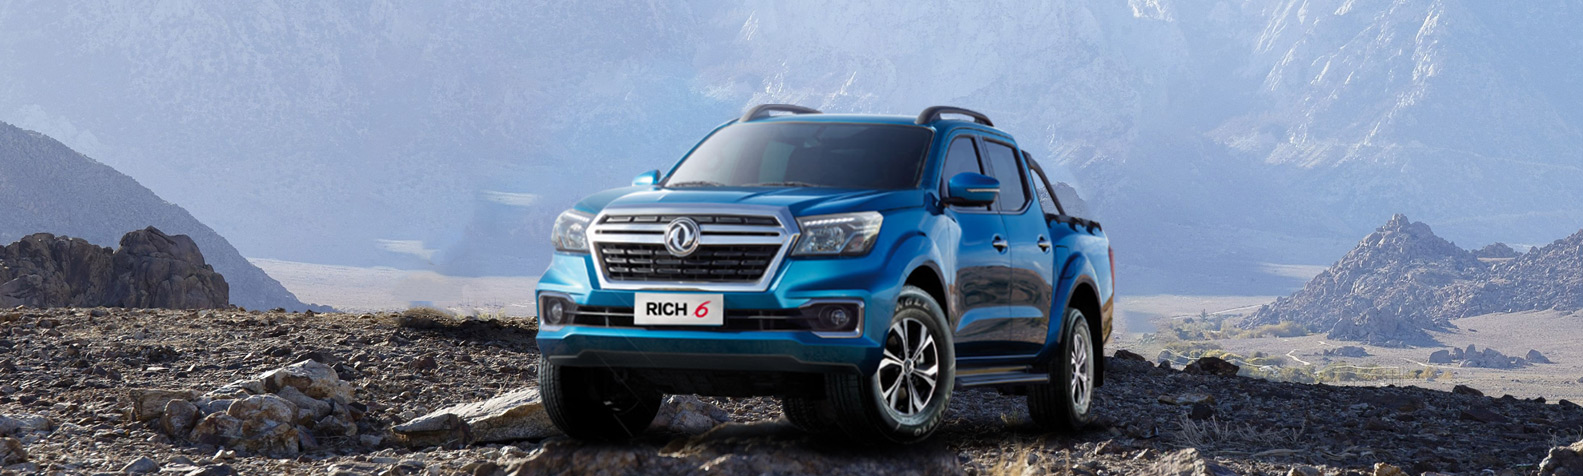 DONGFENG_RICH6_